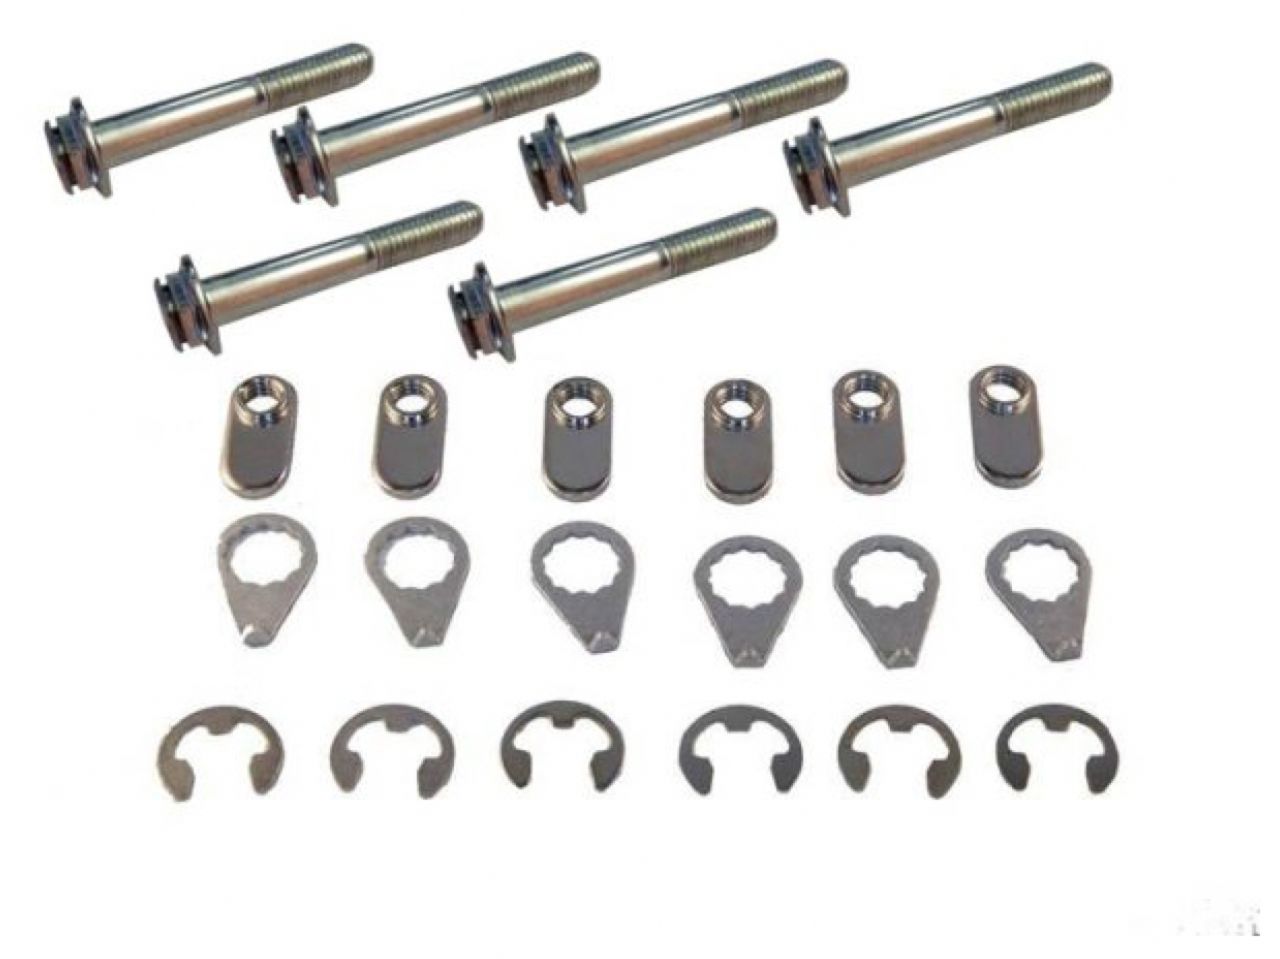 STAGE 8 Collector Kit W/ (6) 10mm - 1.50 X 75mm Flange Bolt